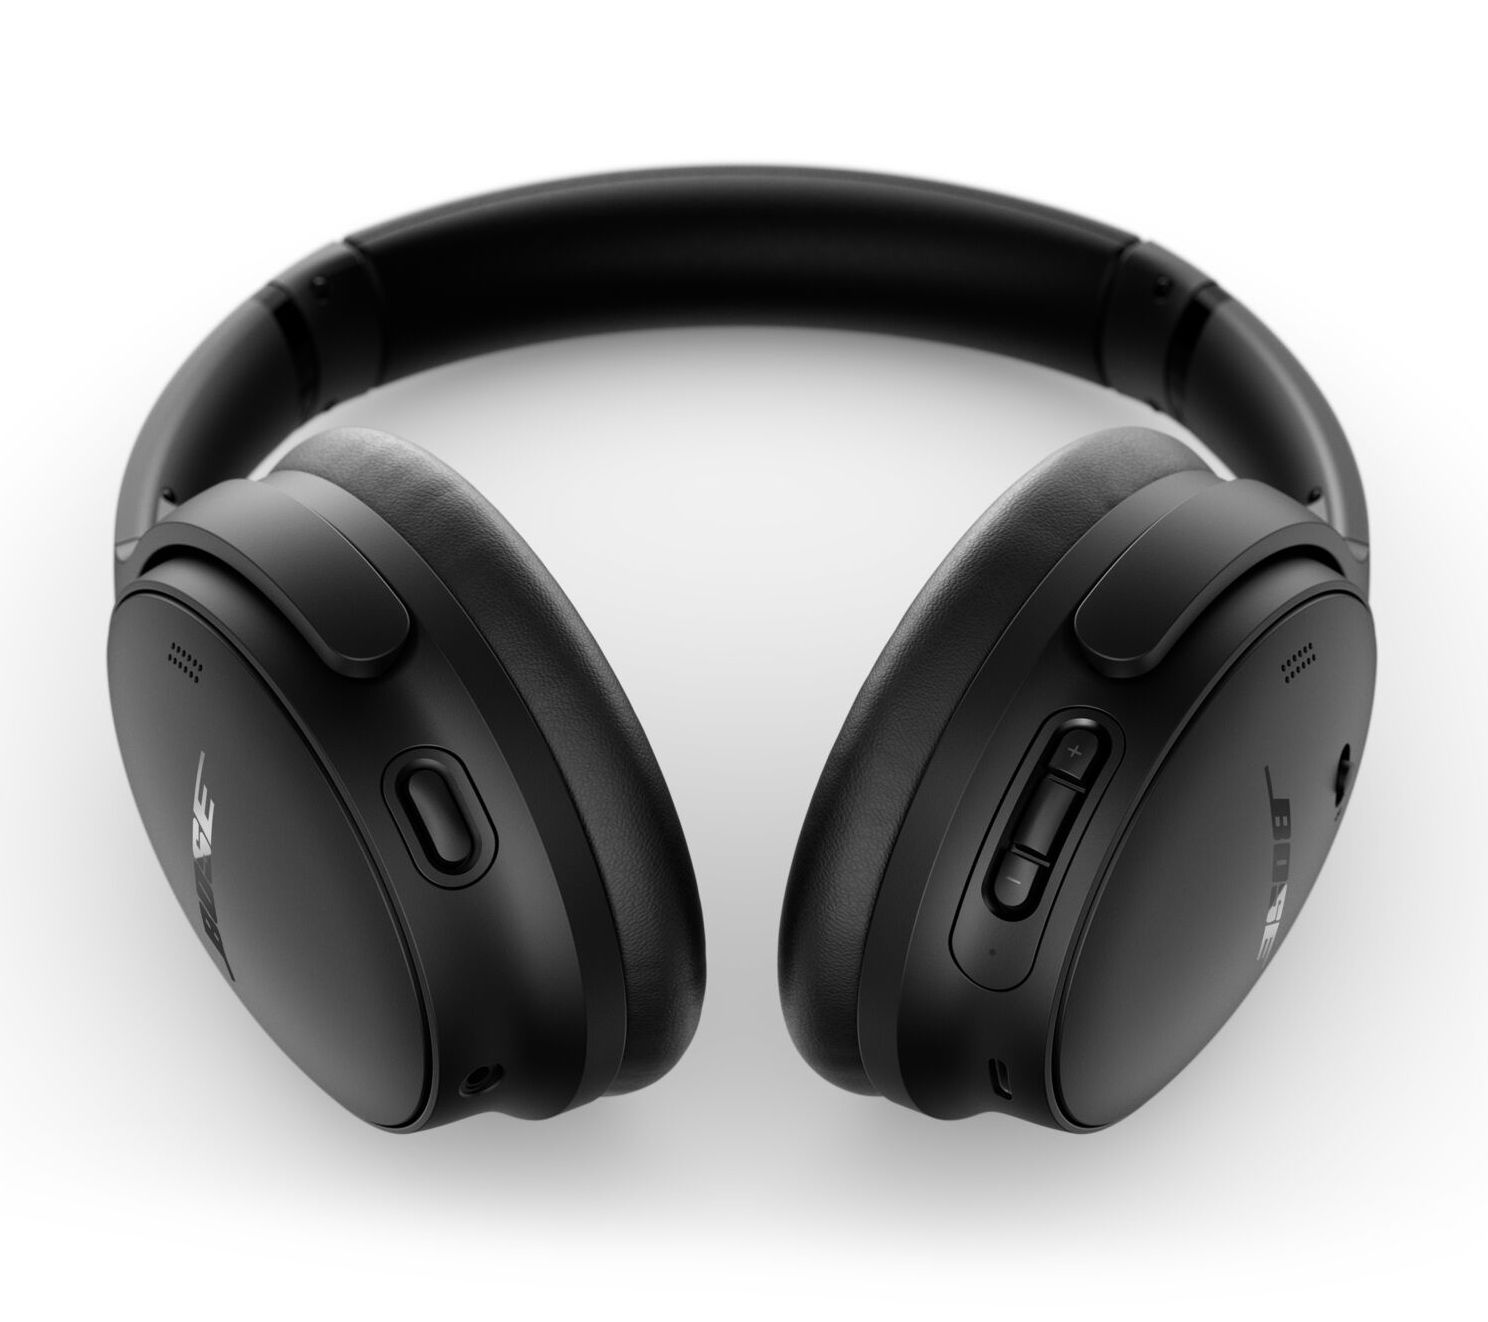 Bose QuietComfort 35 QC35 series II Wireless Headphones Noise-Cancelling  Silver - International Society of Hypertension